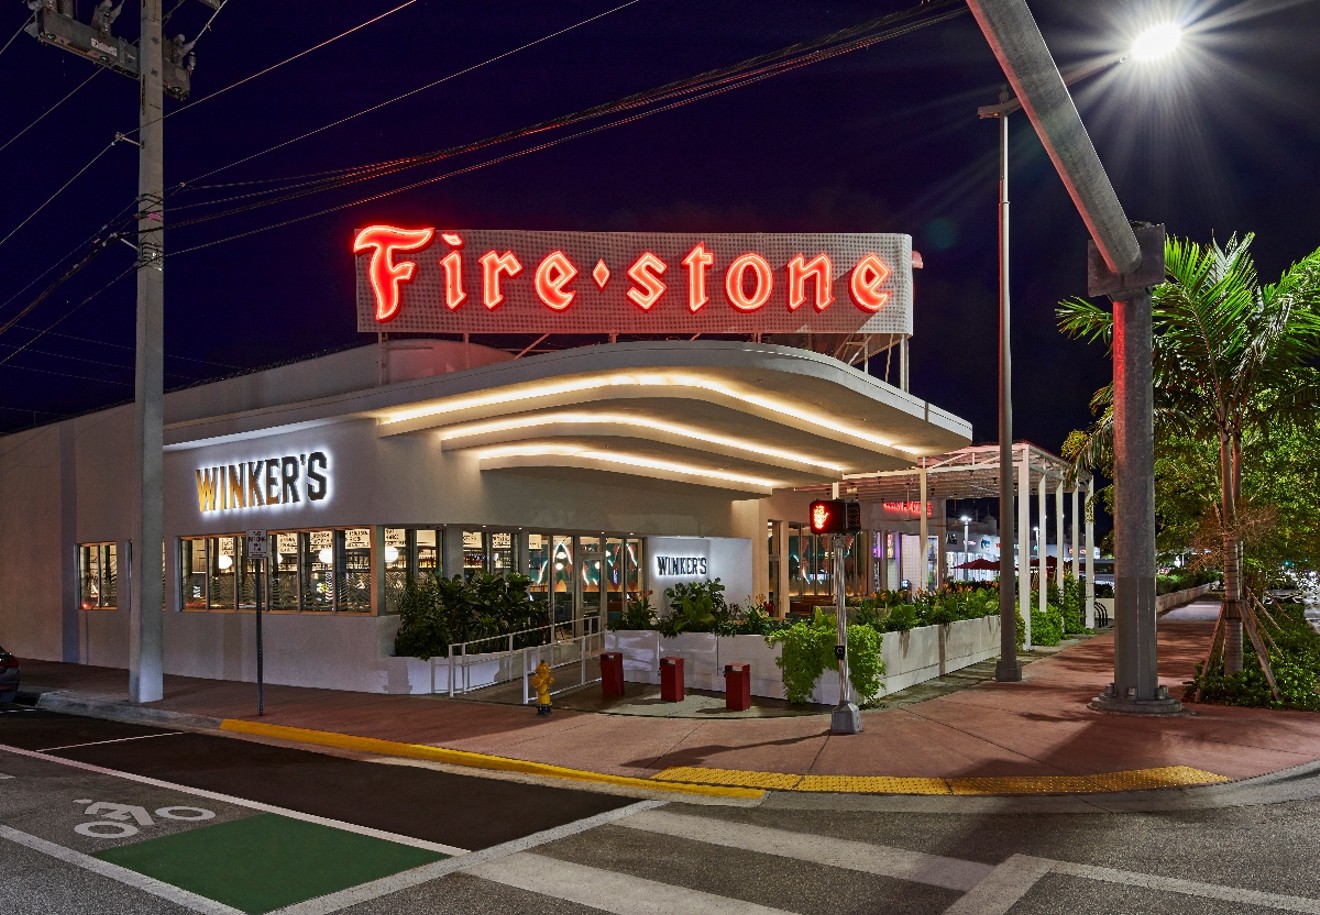 Winker's Diner opens at the Firestone Garage building in Miami Beach.